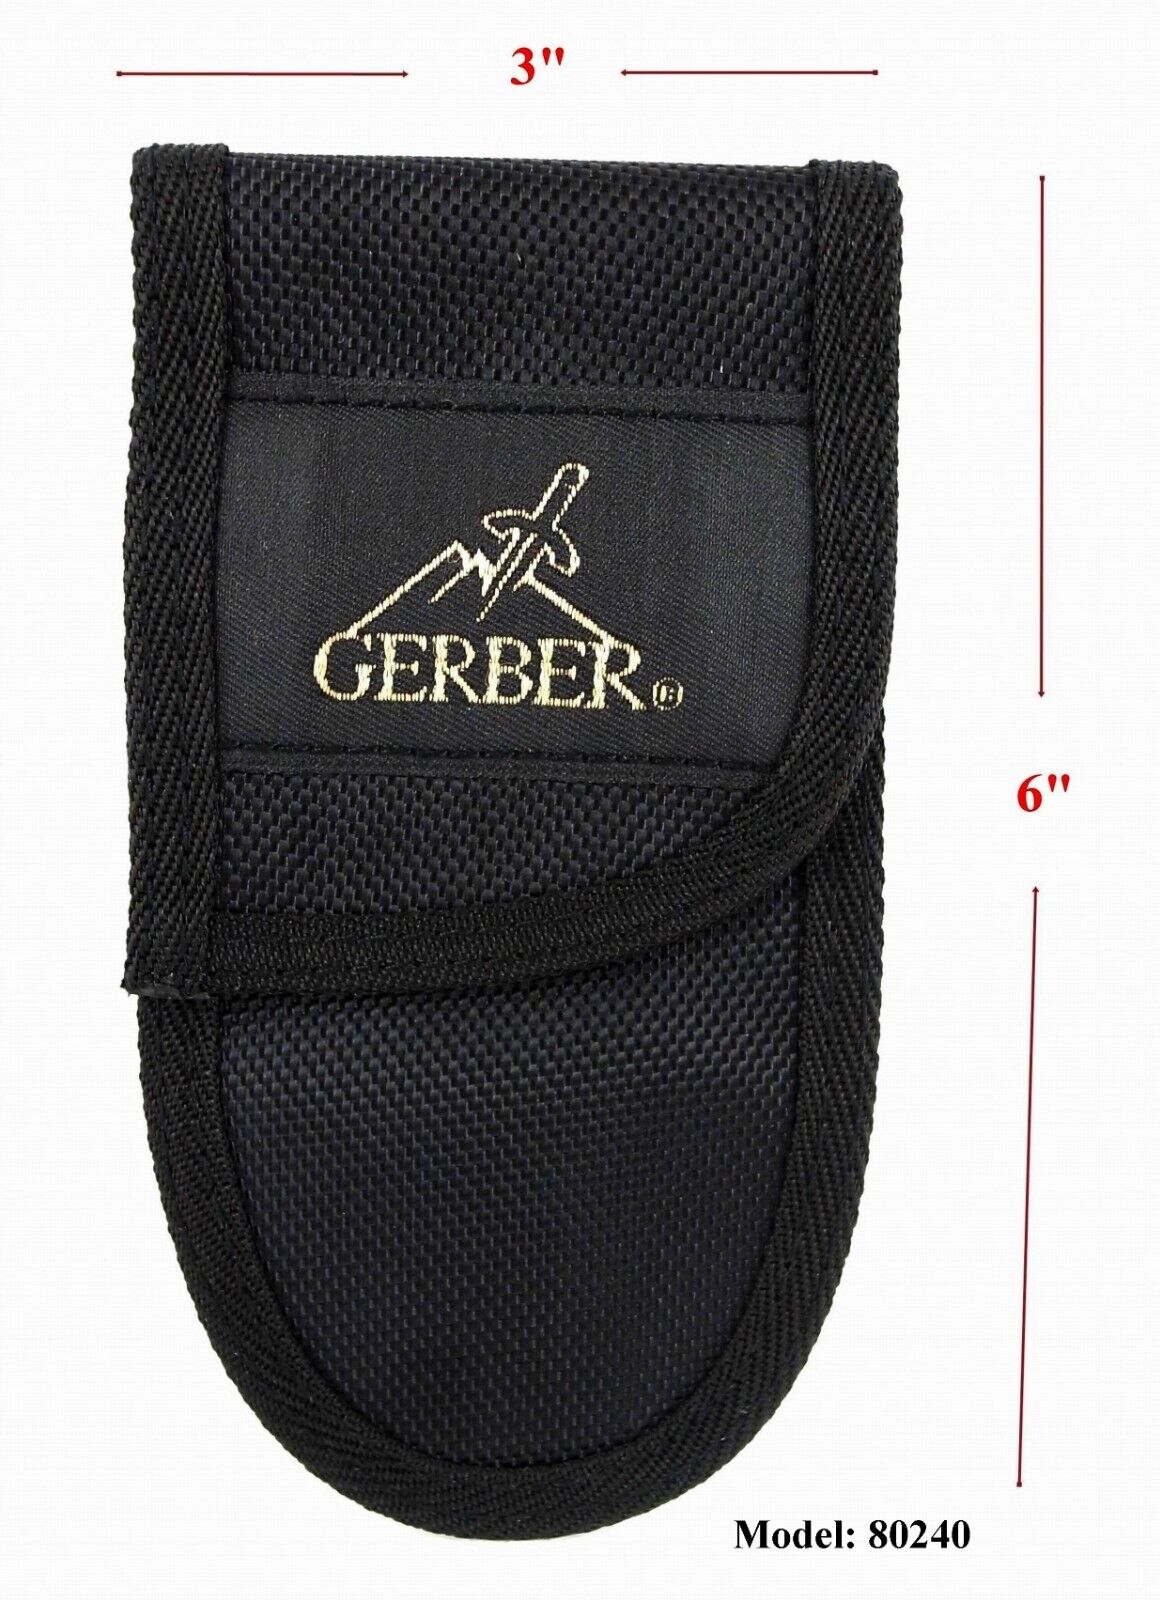 1pc. LARGE SIZE, NEW, 15 x 8cm UNUSED GERBER MULTI TOOL POUCH SHEATH BUY IT NOW